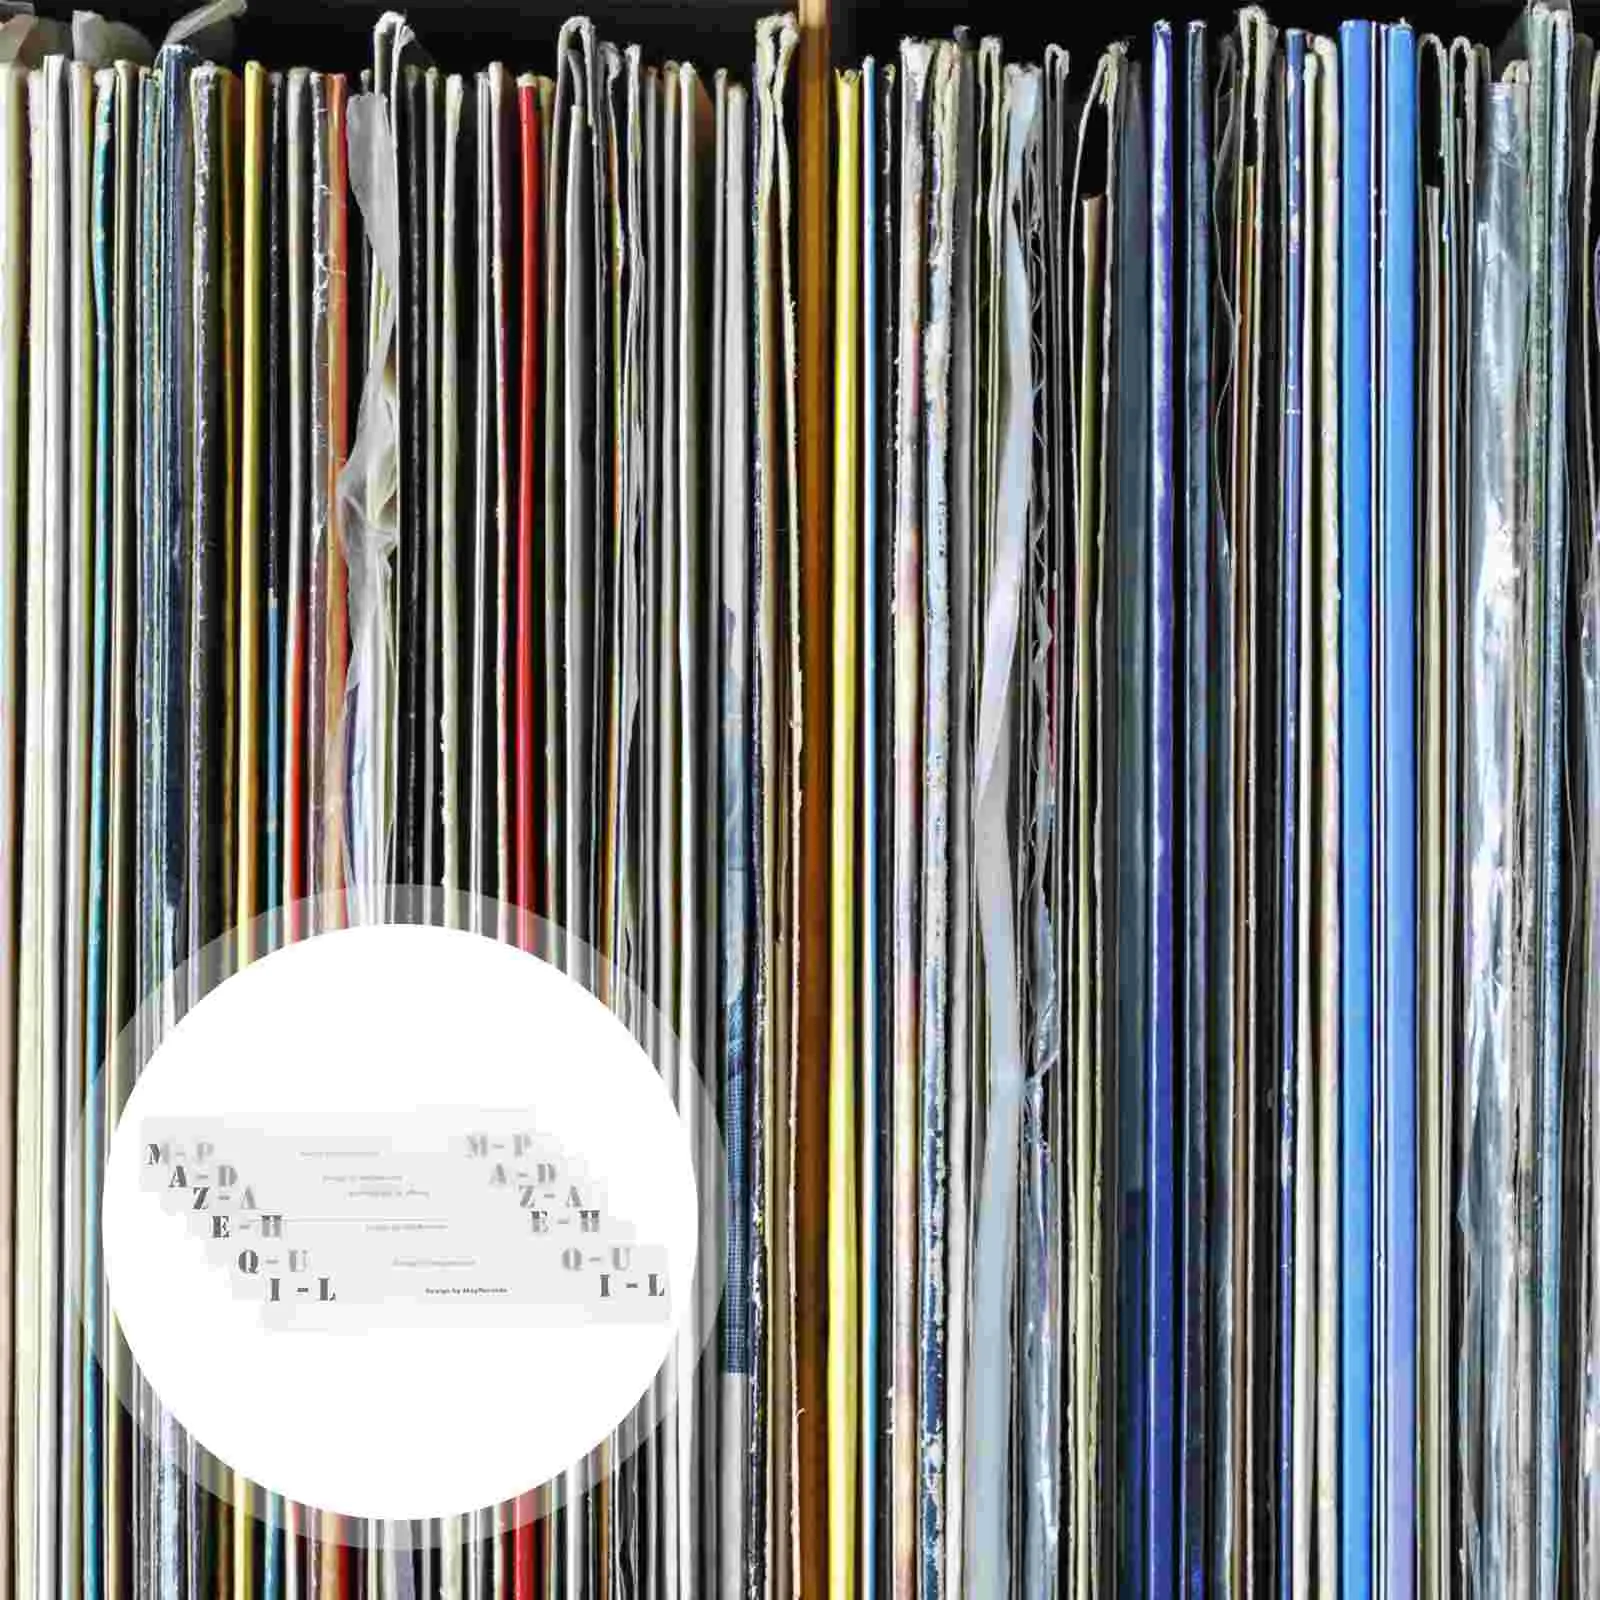 

6 Pcs Record Sorting Card CD Disc Divider Category Label Organizer Index Cards Horizontal for Labels Classification